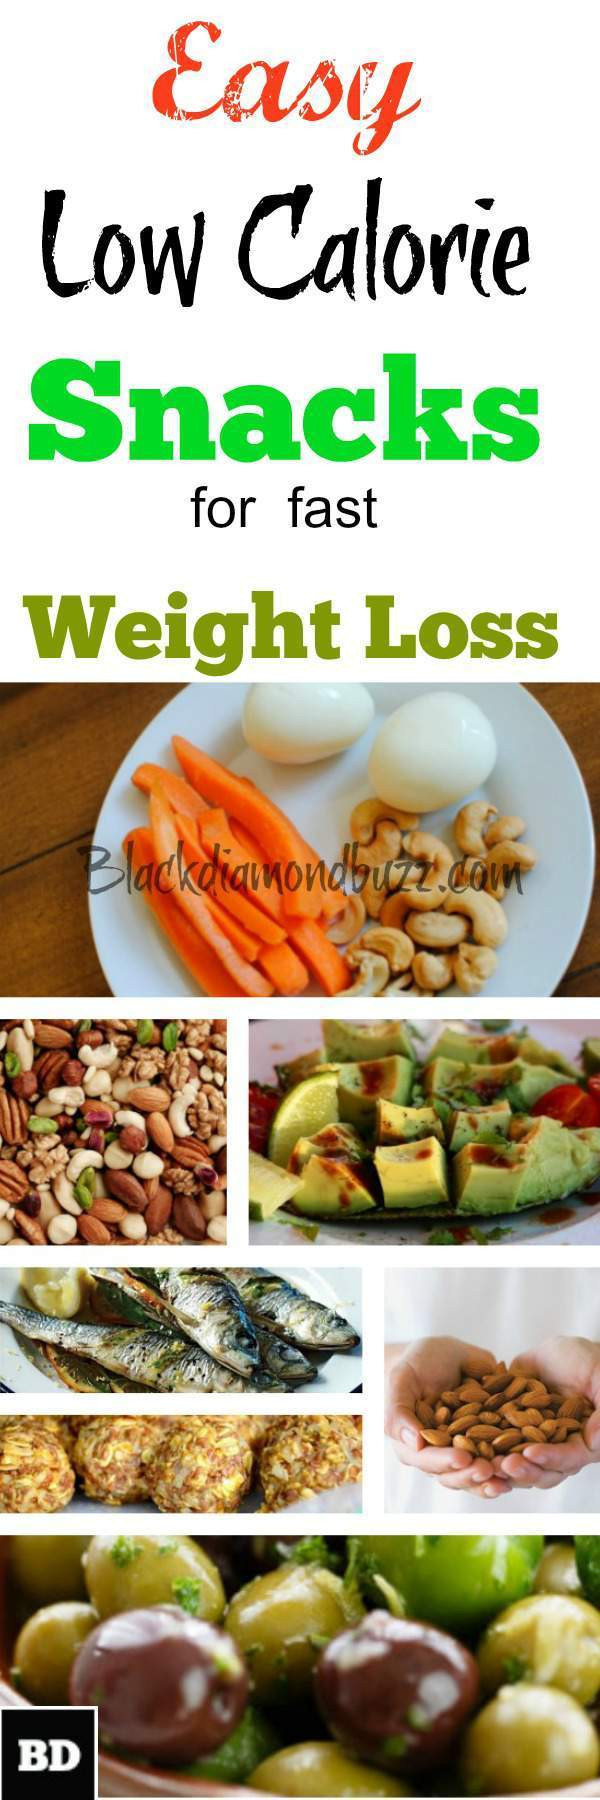 Low Calorie Snacks Recipes
 10 Best Easy Healthy Low Calorie Snacks for Weight Loss